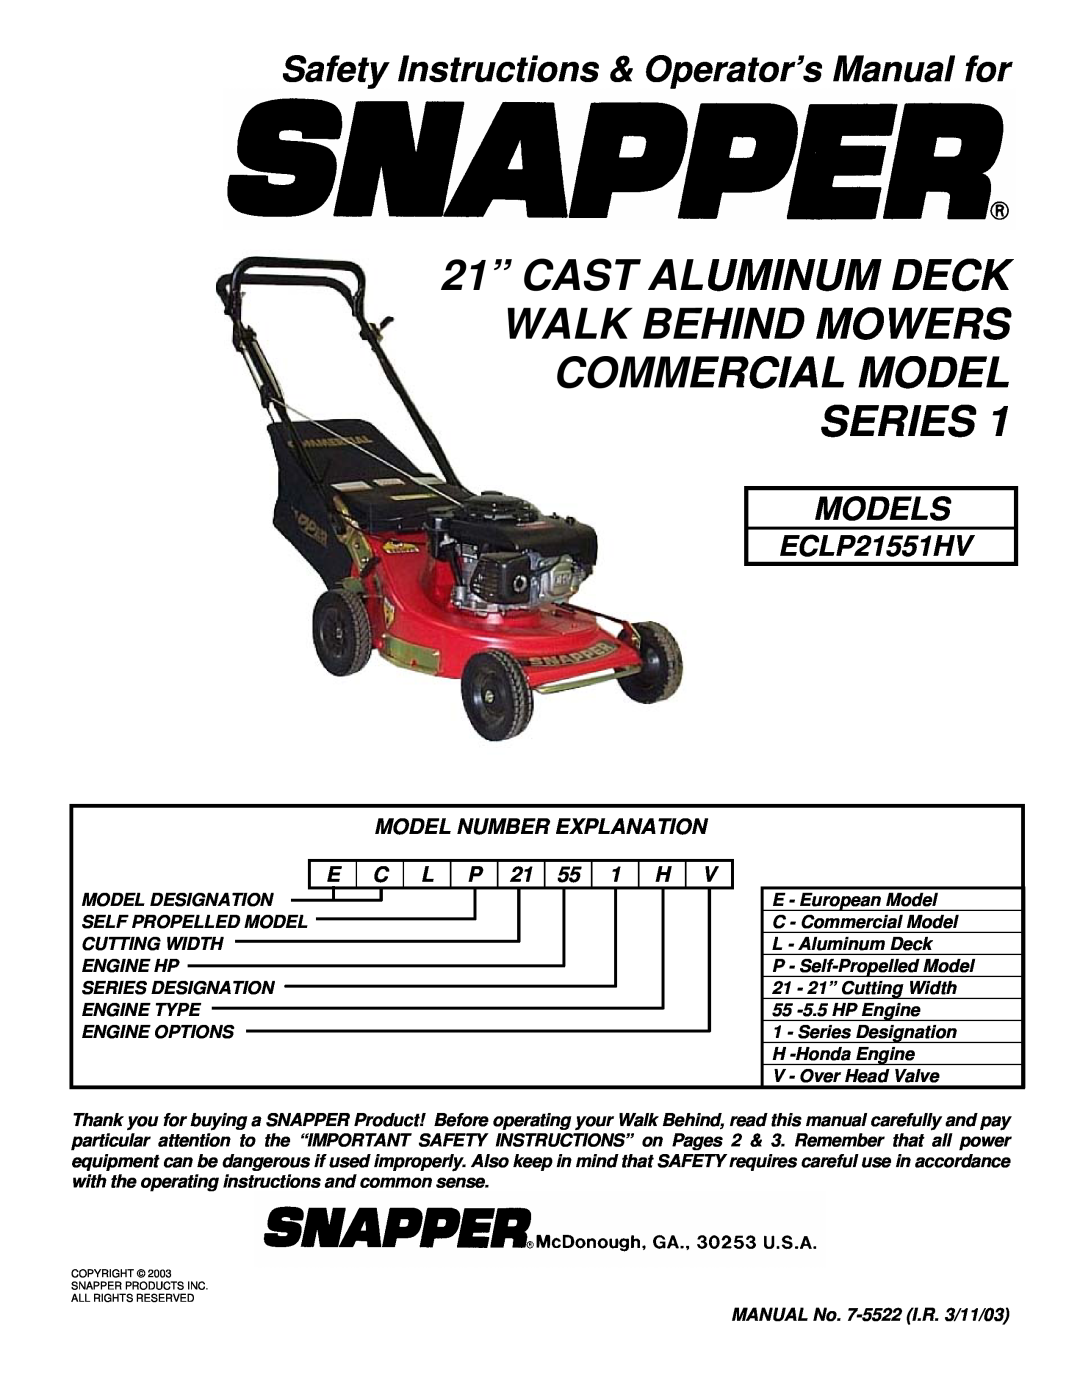 Snapper ECLP21 551HV important safety instructions Safety Instructions & Operator’s Manual for, Models, ECLP21551HV 